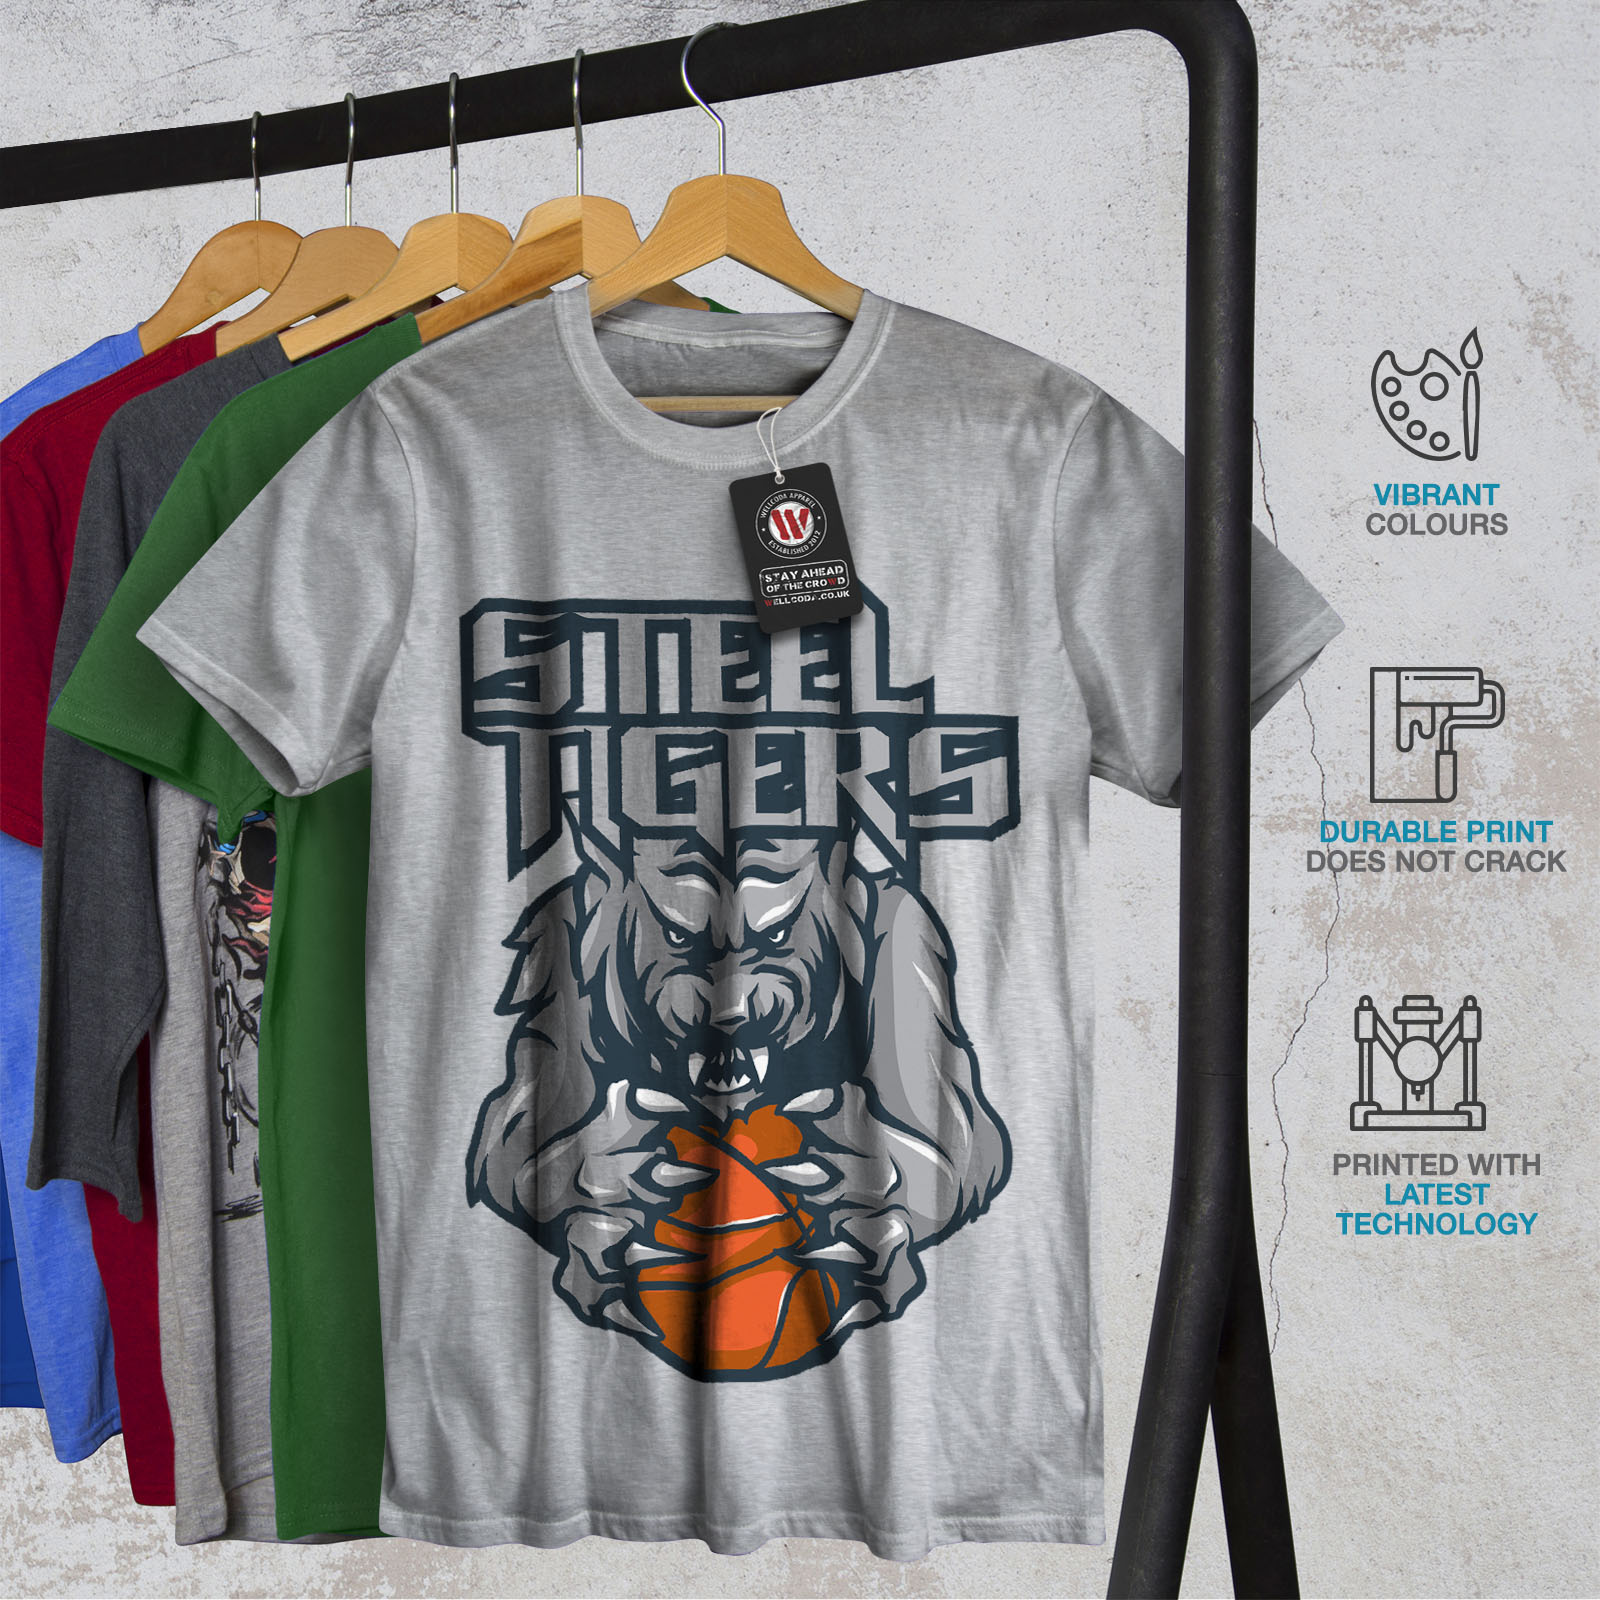 Details about   Wellcoda Tiger Basketball Mens T-shirt Basketball Graphic Design Printed Tee